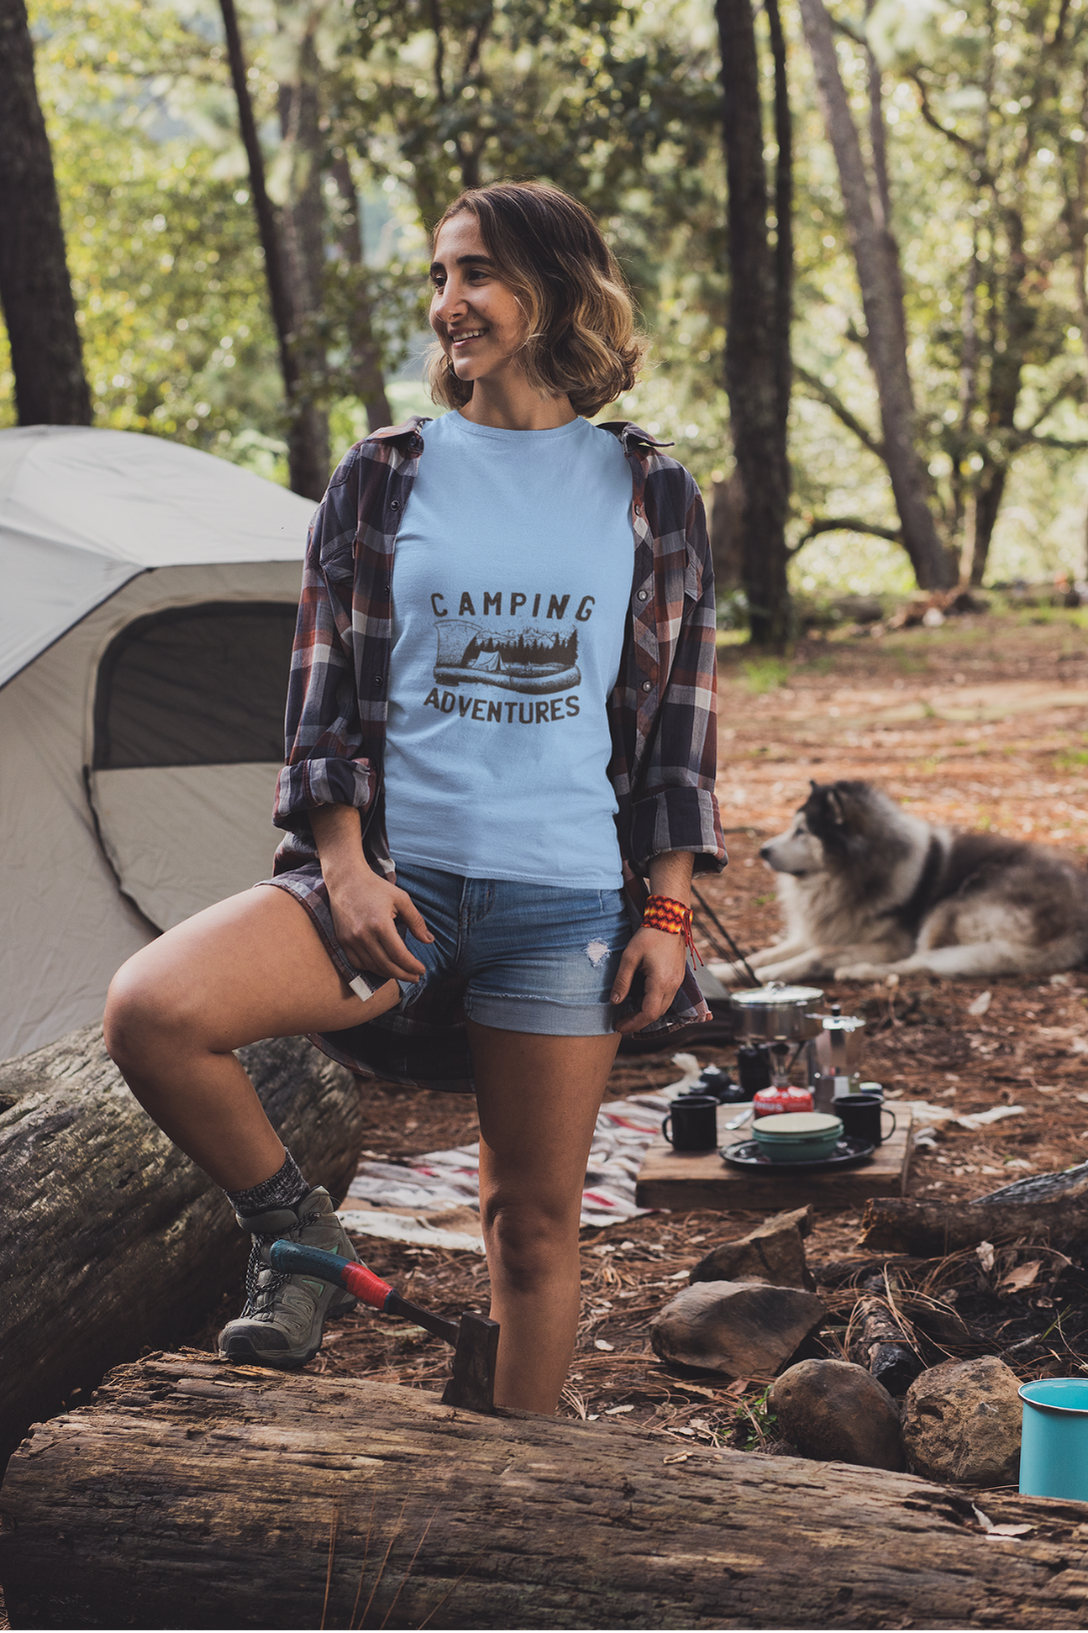 Camping Adventures Printed T-Shirt For Women - WowWaves - 3